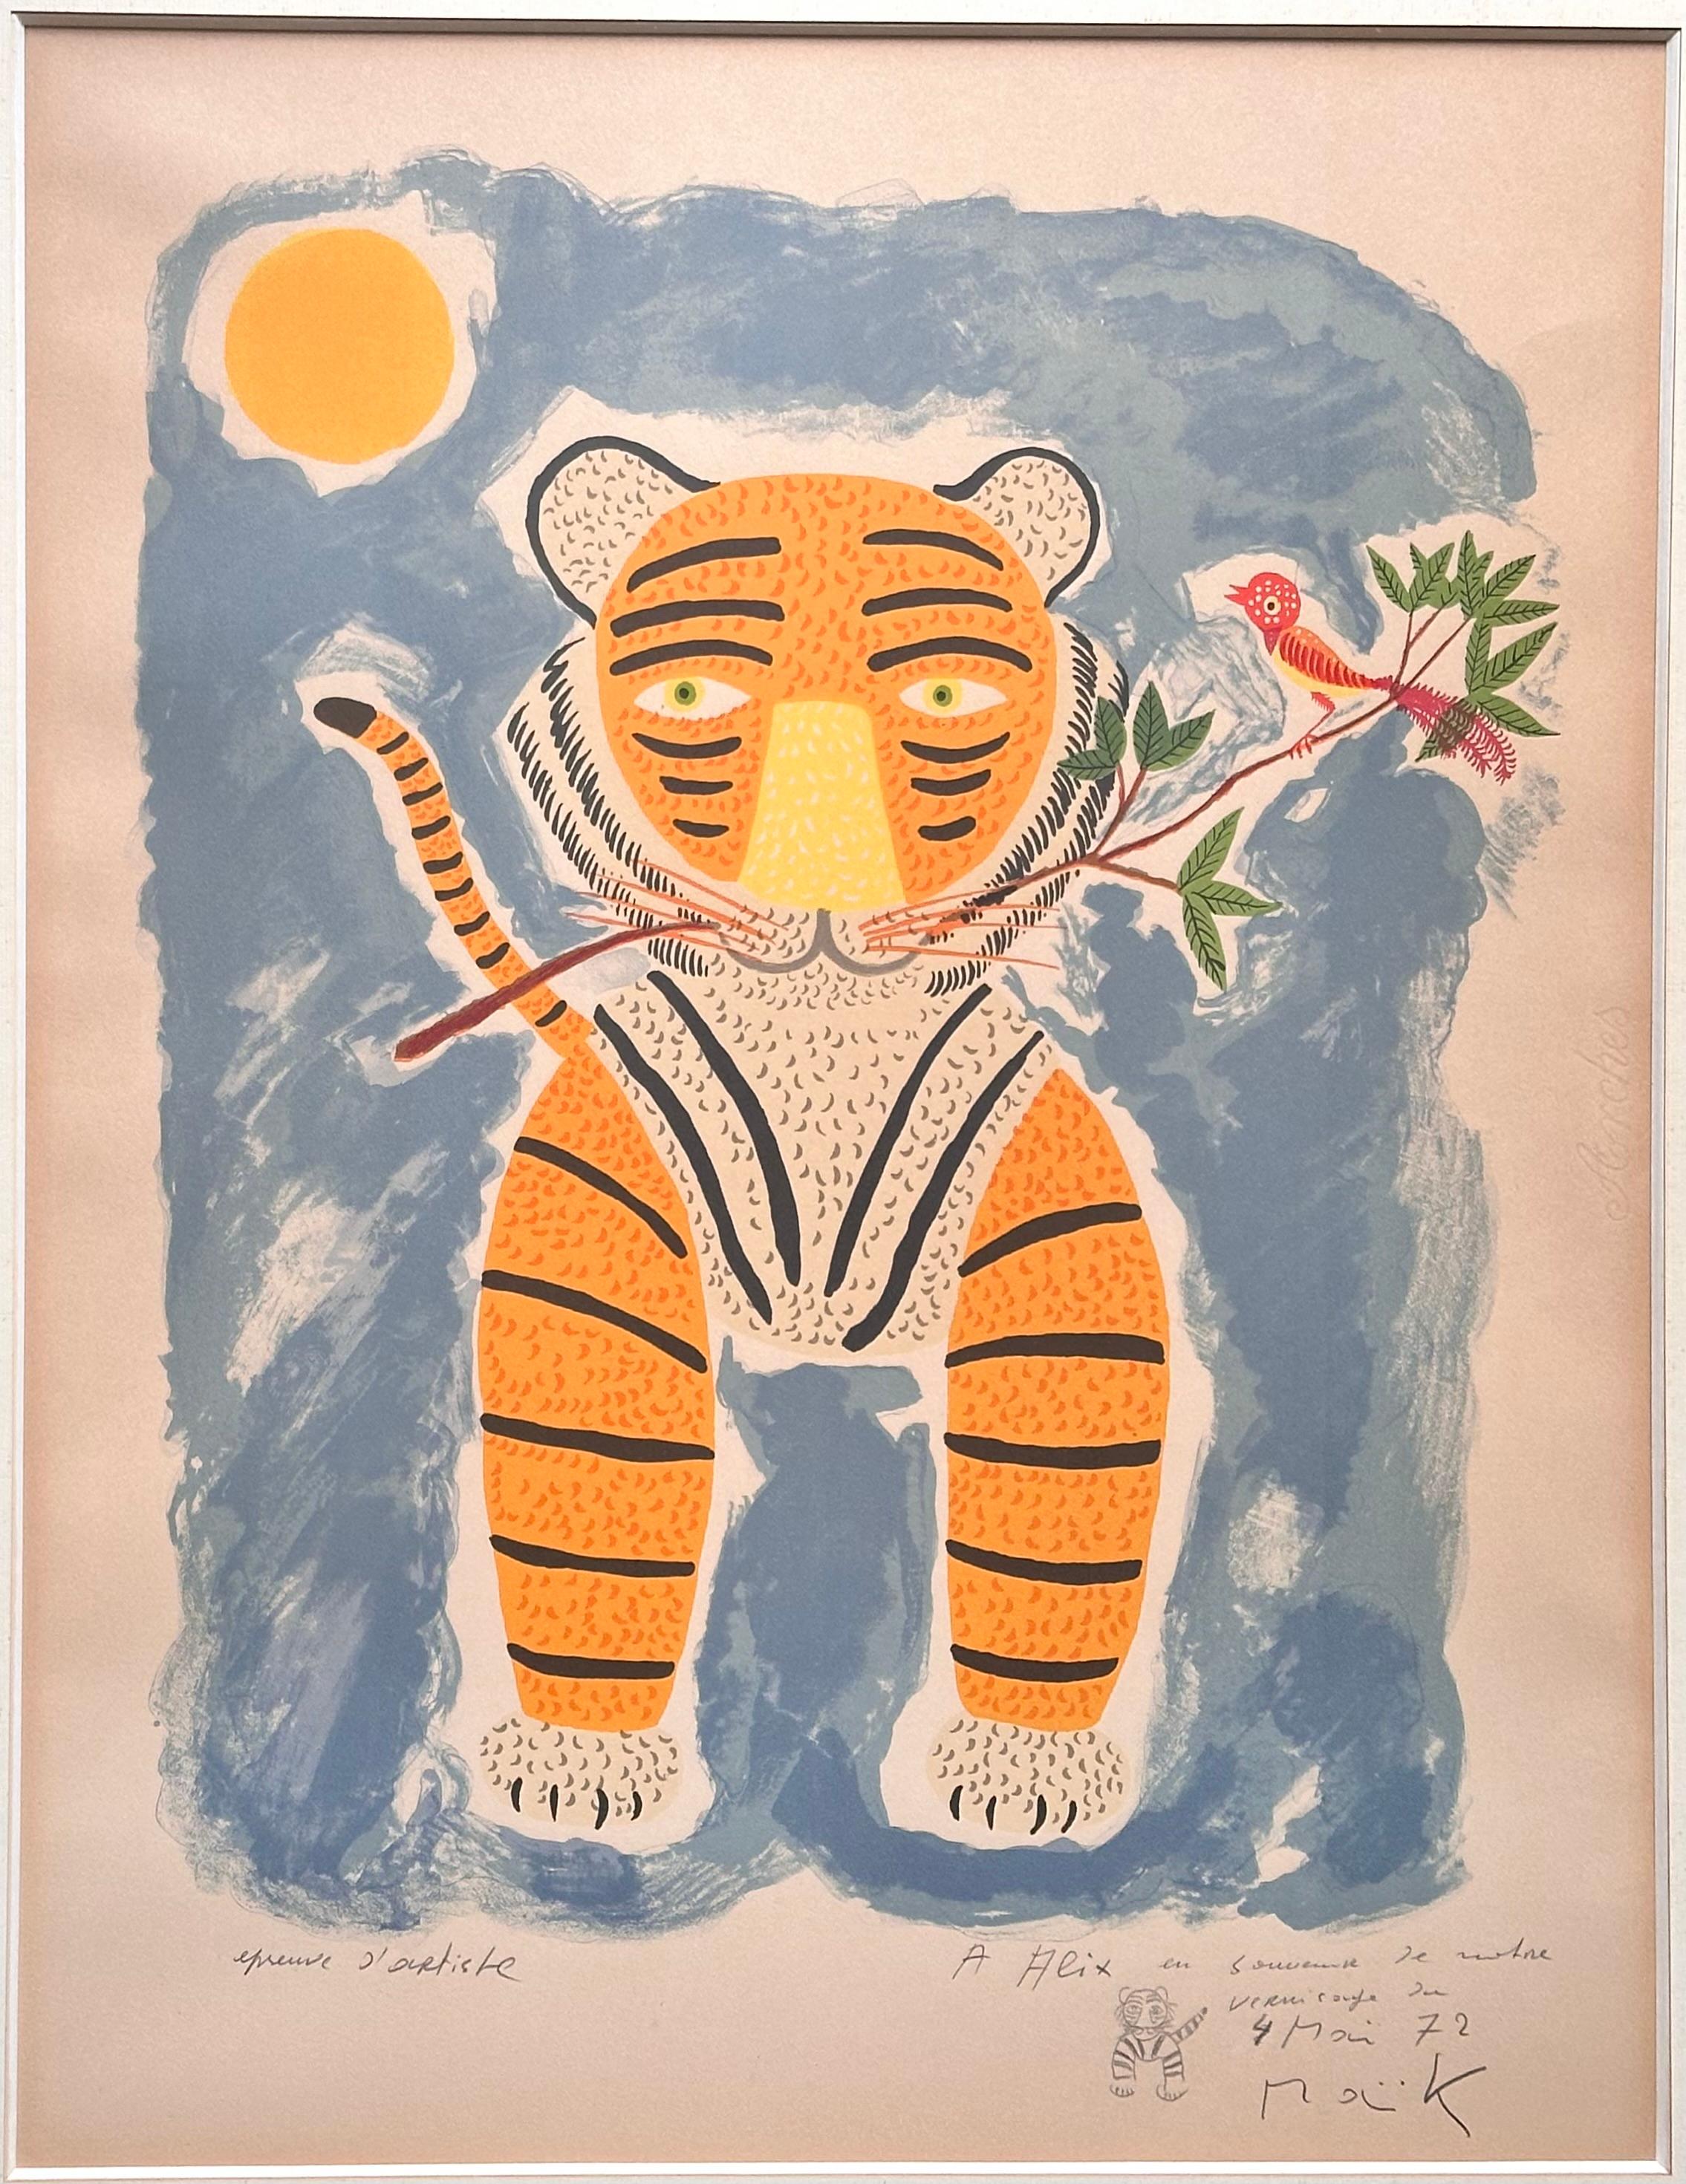 Henri Hecht MAÏK (1922-1993) French painter
Lithograph « The Tiger and the Bird » from 1972

Signed rare artist’s proof on wove paper.

A small tiger is drawn lower right with pencil
with a dedication, date and signature:
« A Alix en souvenir de